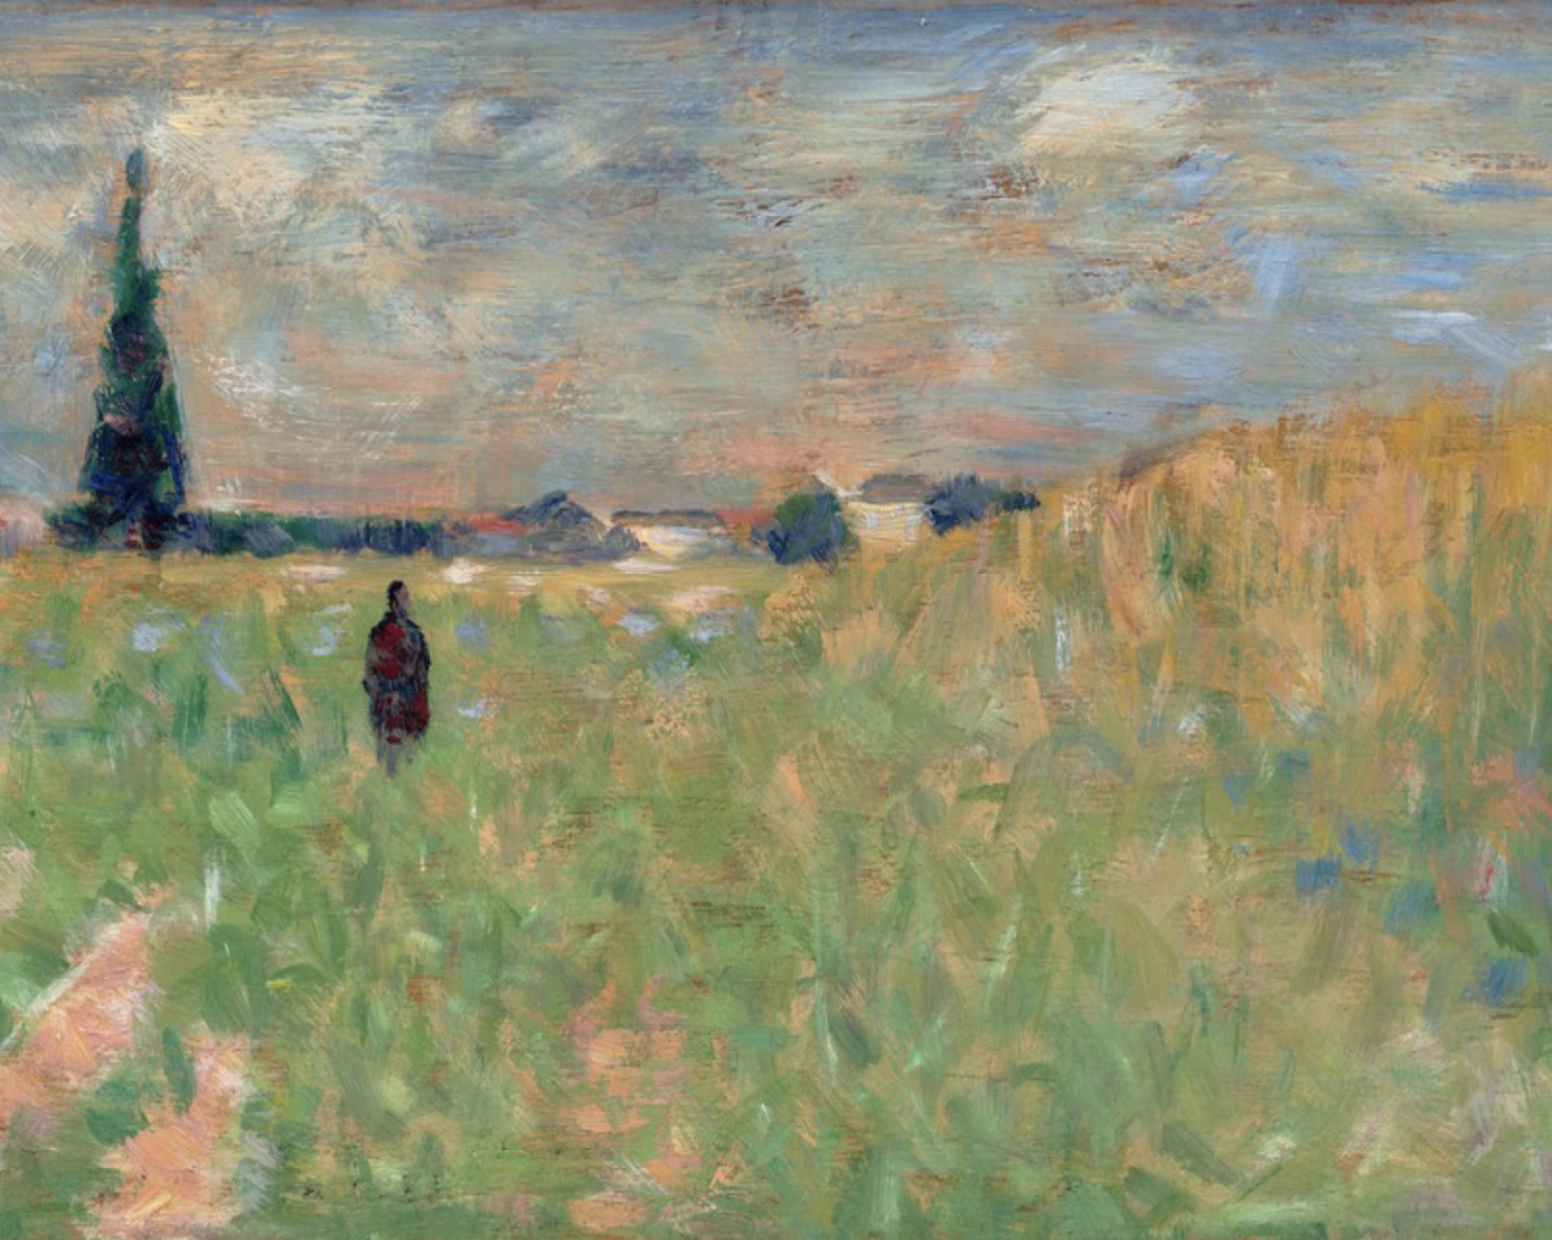 A Summer Landscape by Georges Seurat, 1883